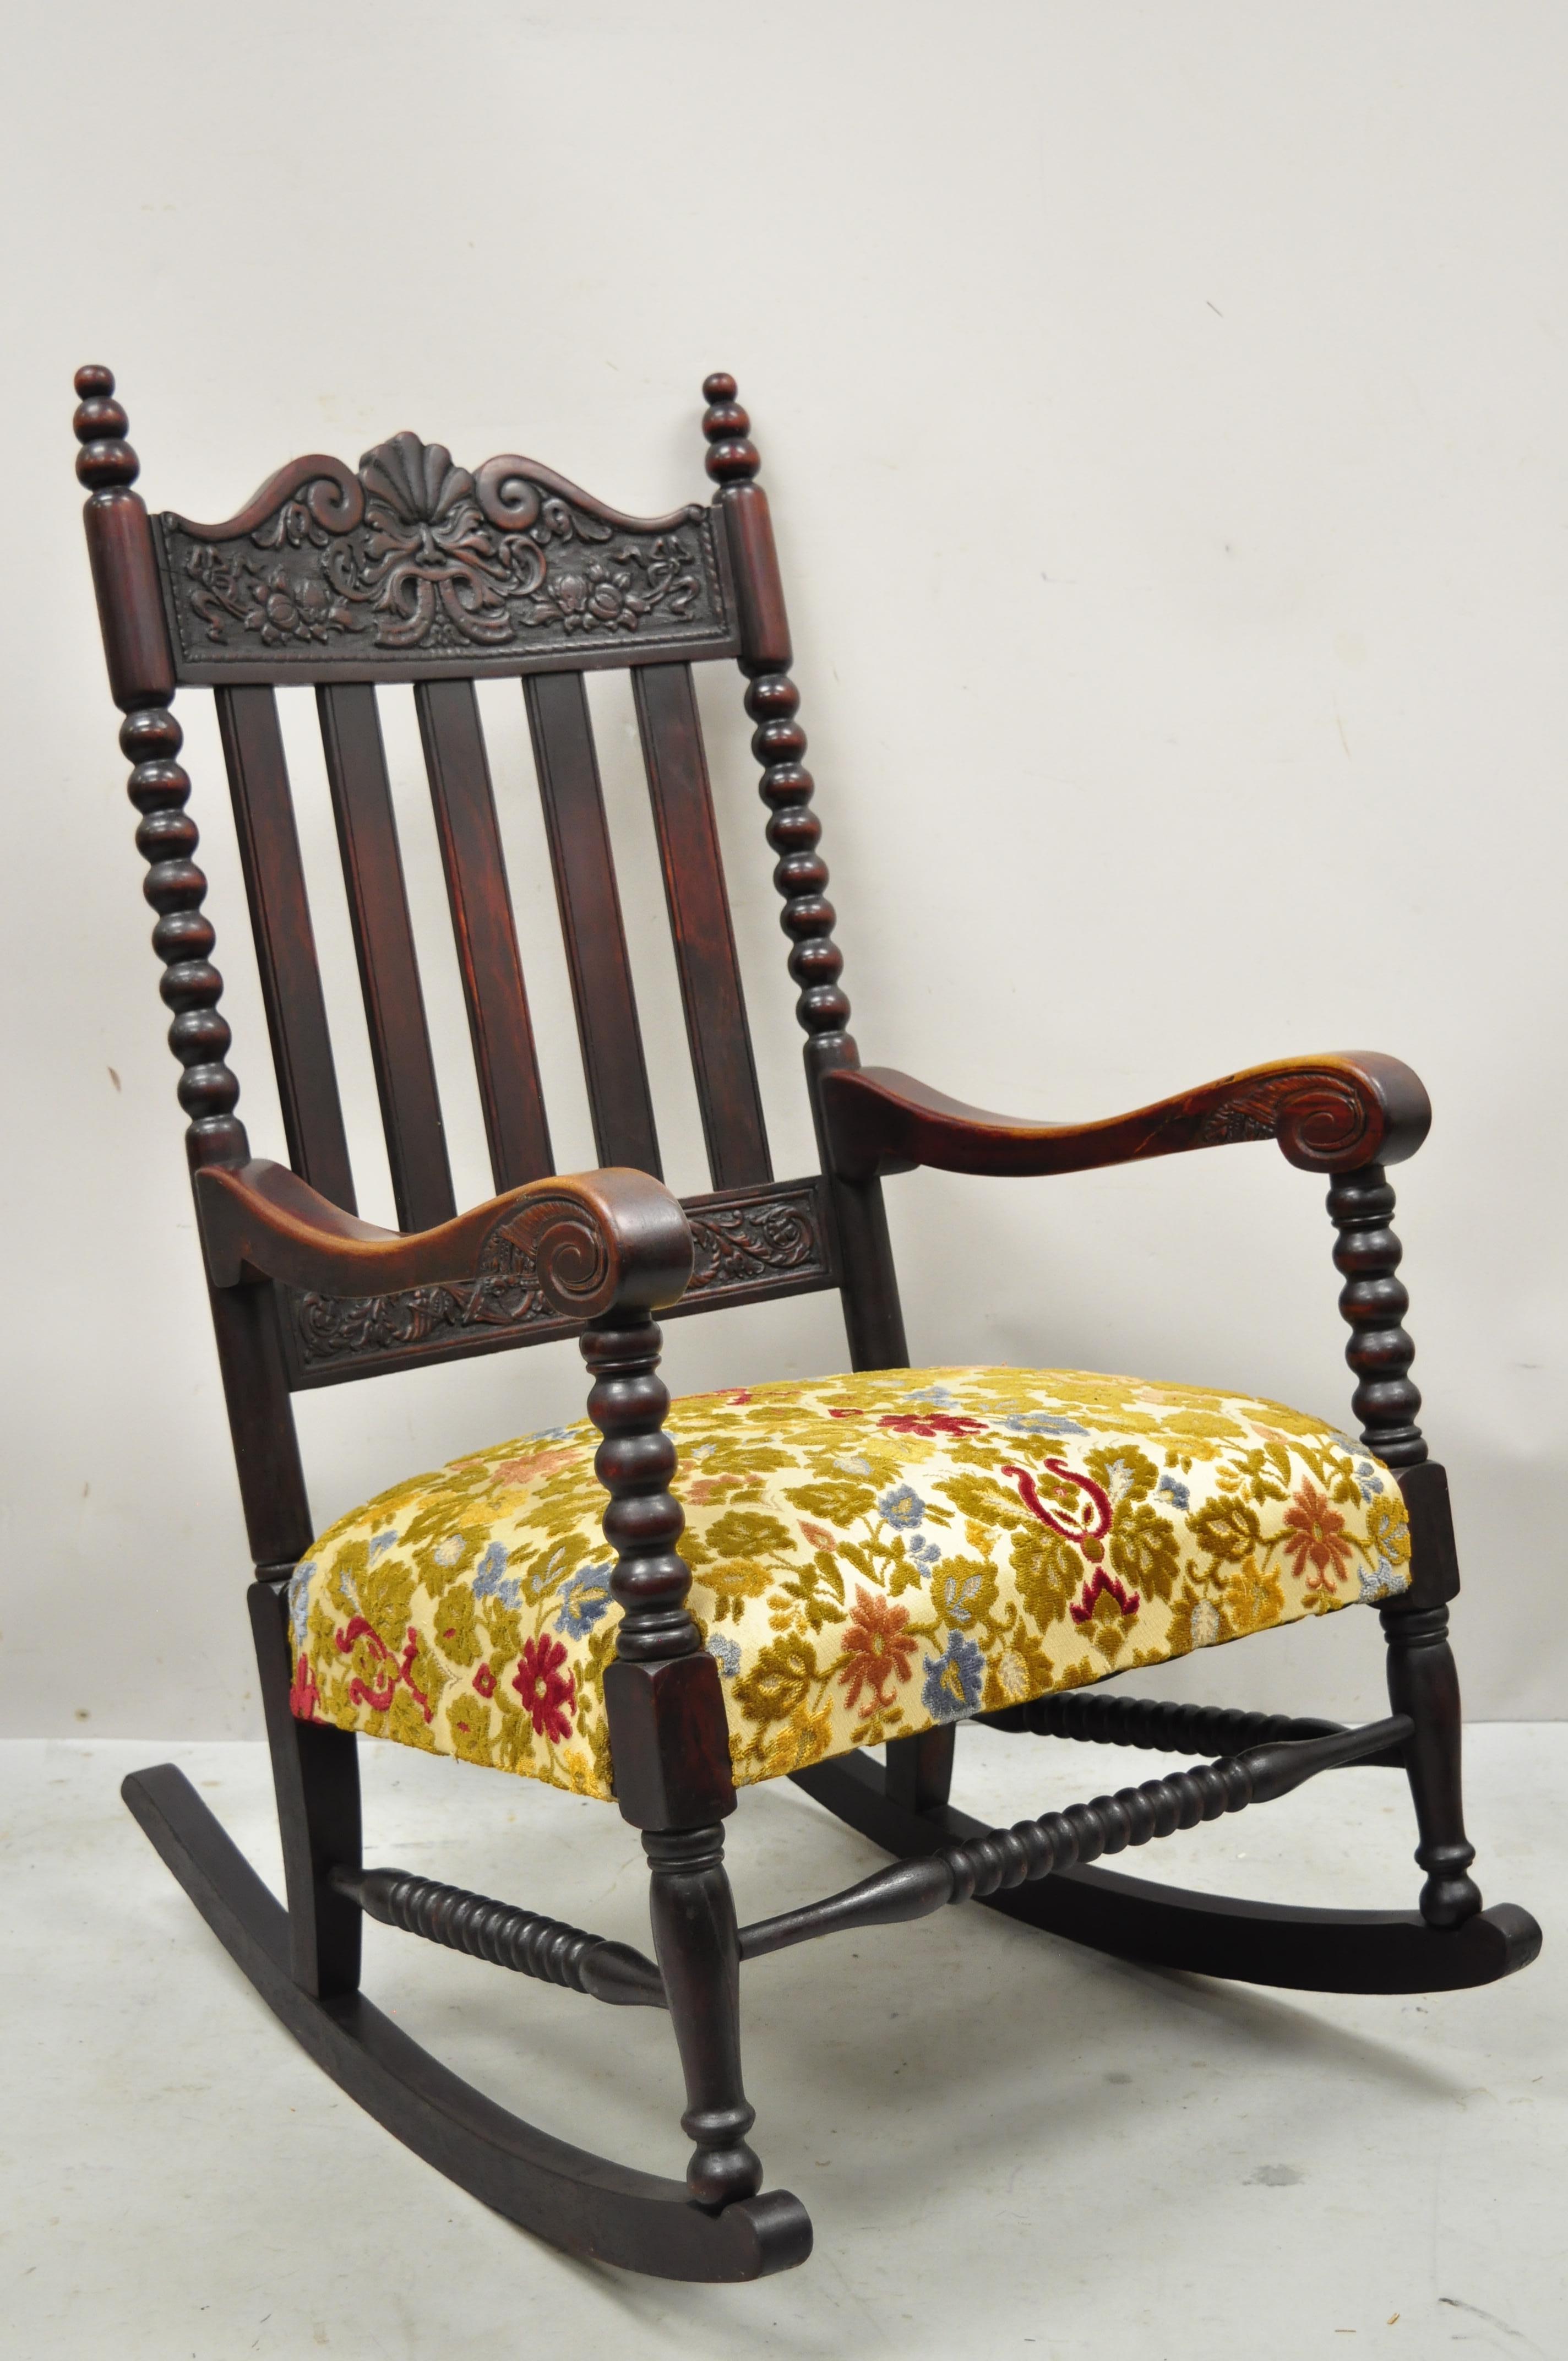 Antique Victorian carved mahogany northwind face and cornucopia rocking chair rocker. Item features carved northwind face to top rail, carved cornucopia lower rail, floral crewel work upholstered seat, 